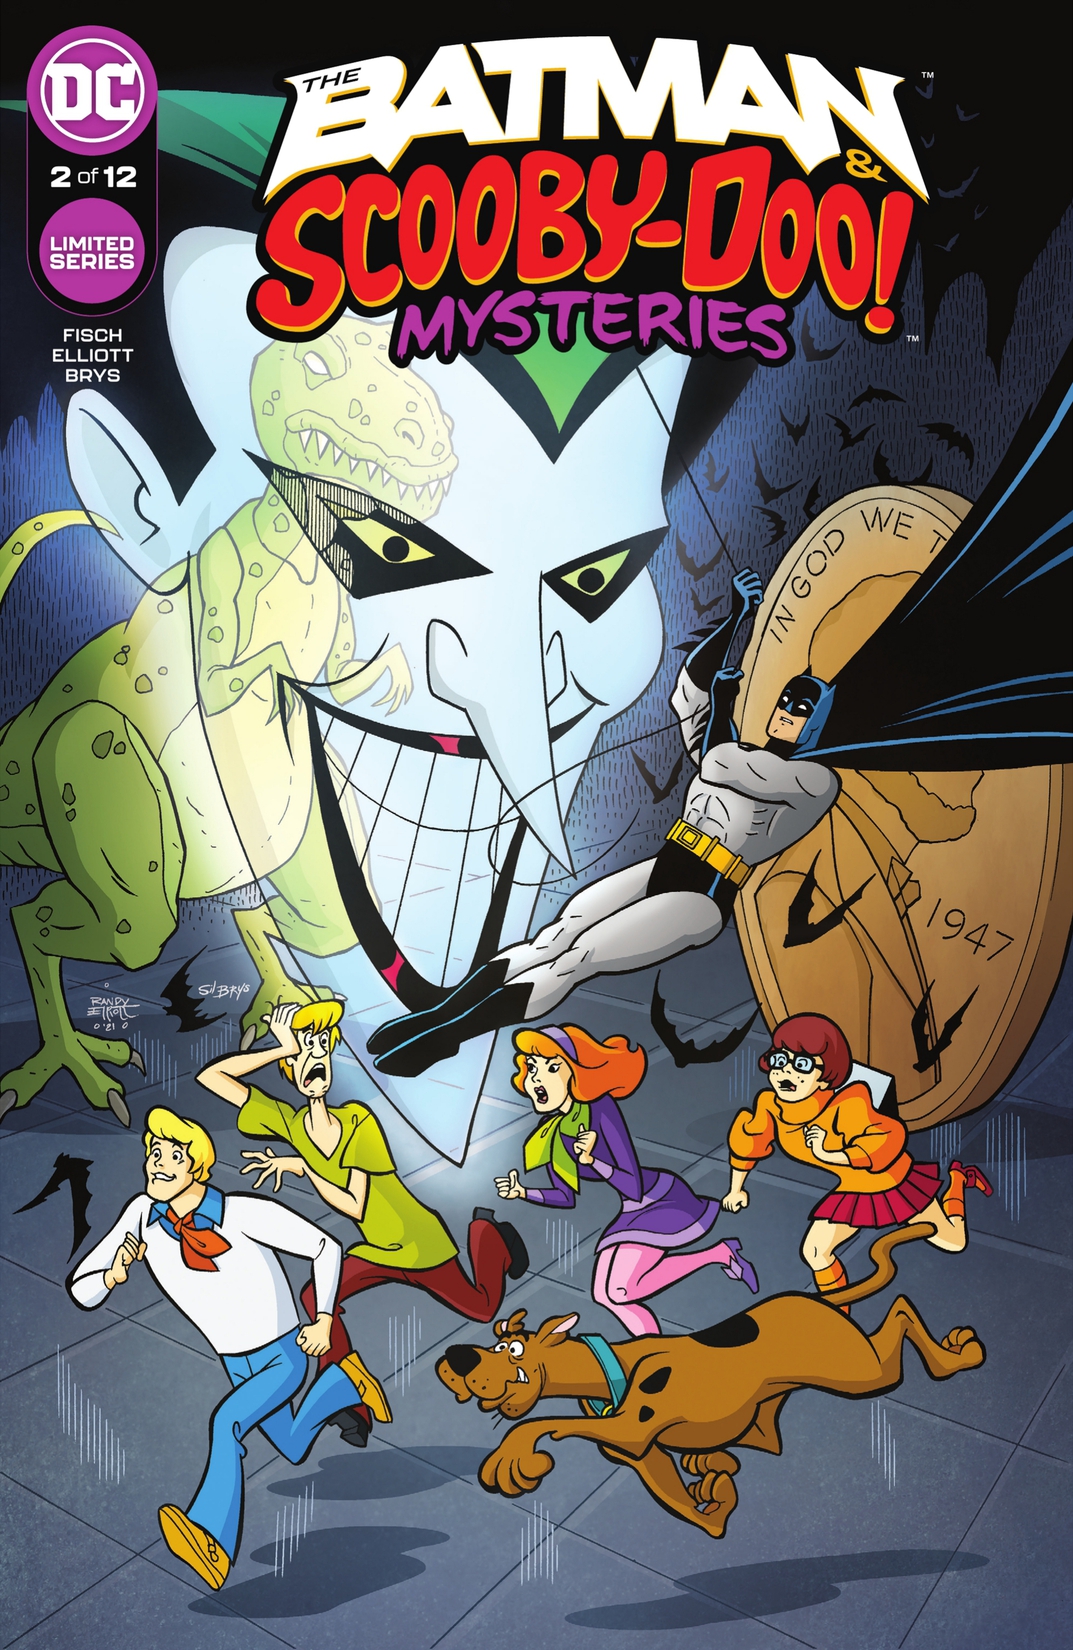 The Batman & Scooby-Doo Mysteries #2 preview images